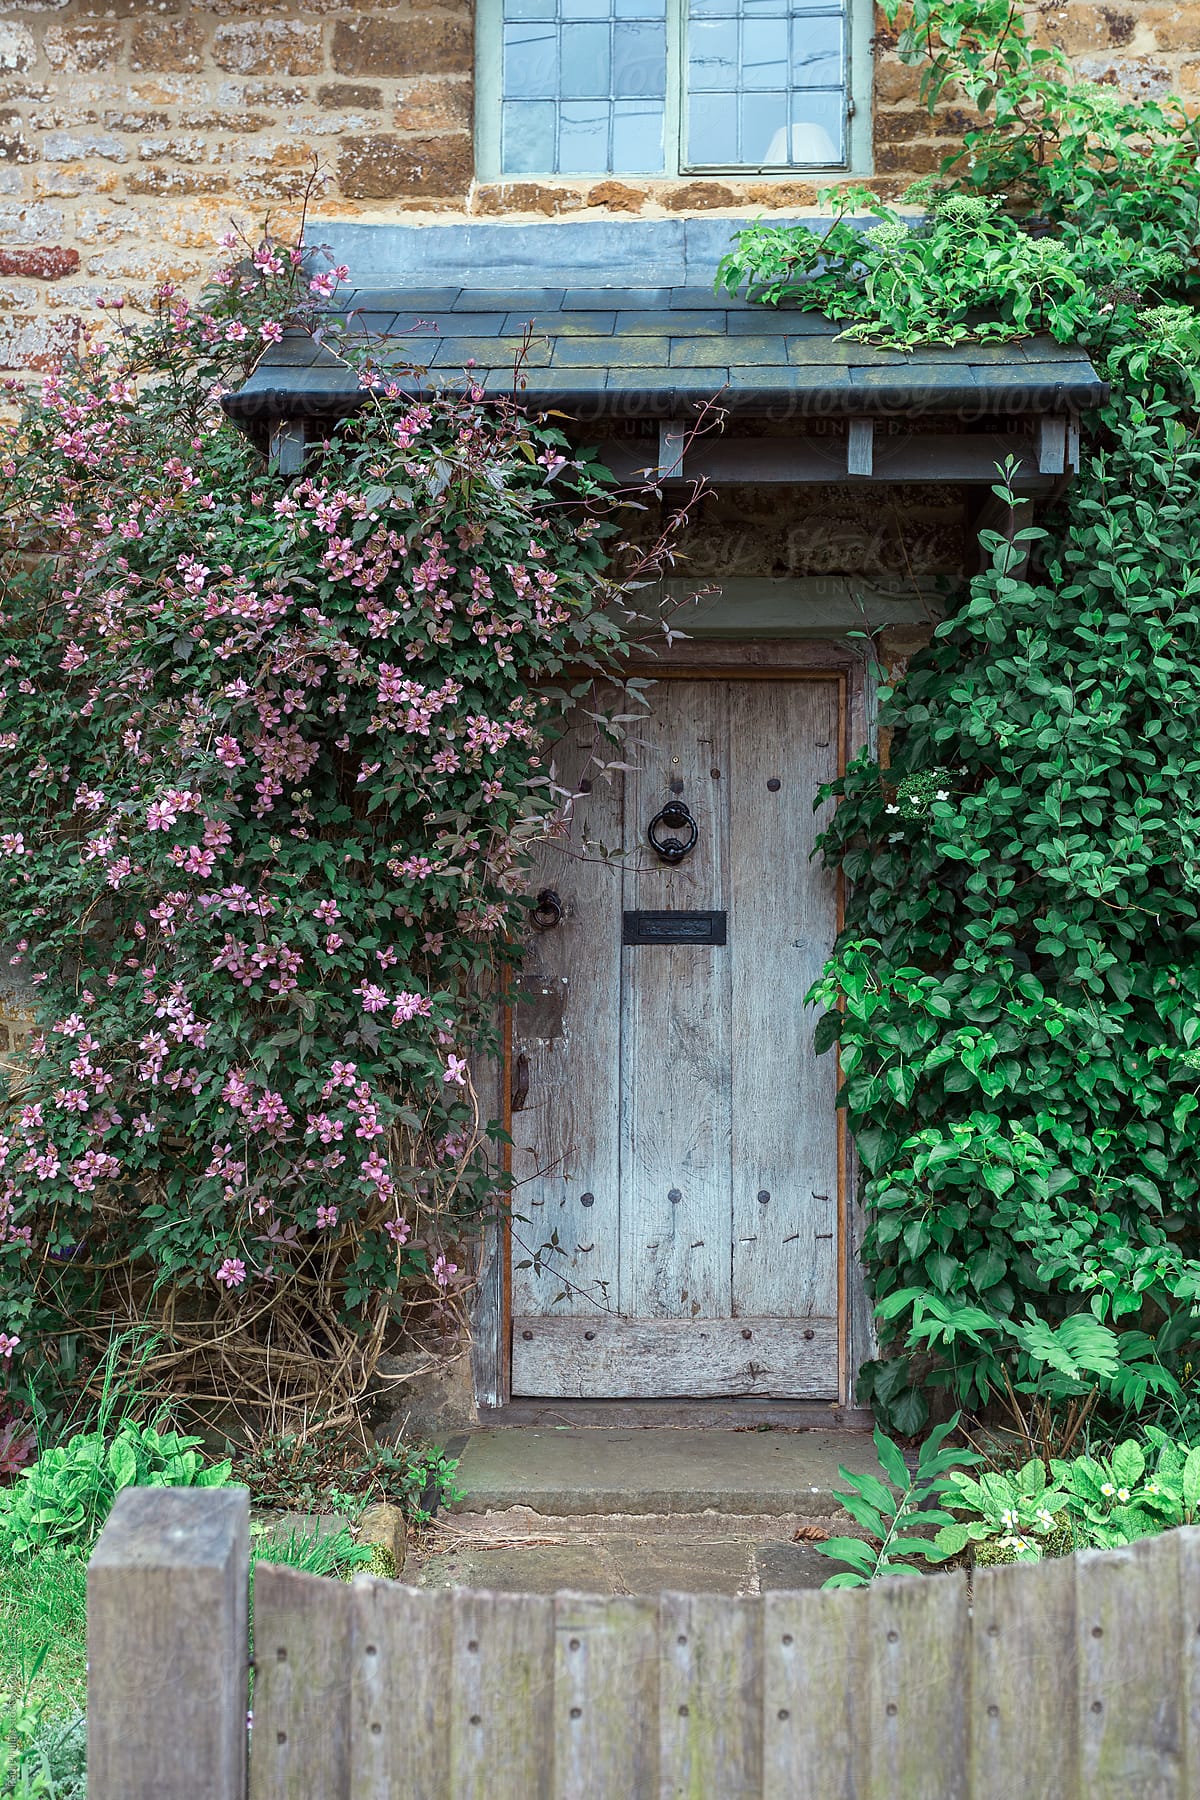 Entrance to an old cottage house with plants growing around the front door.